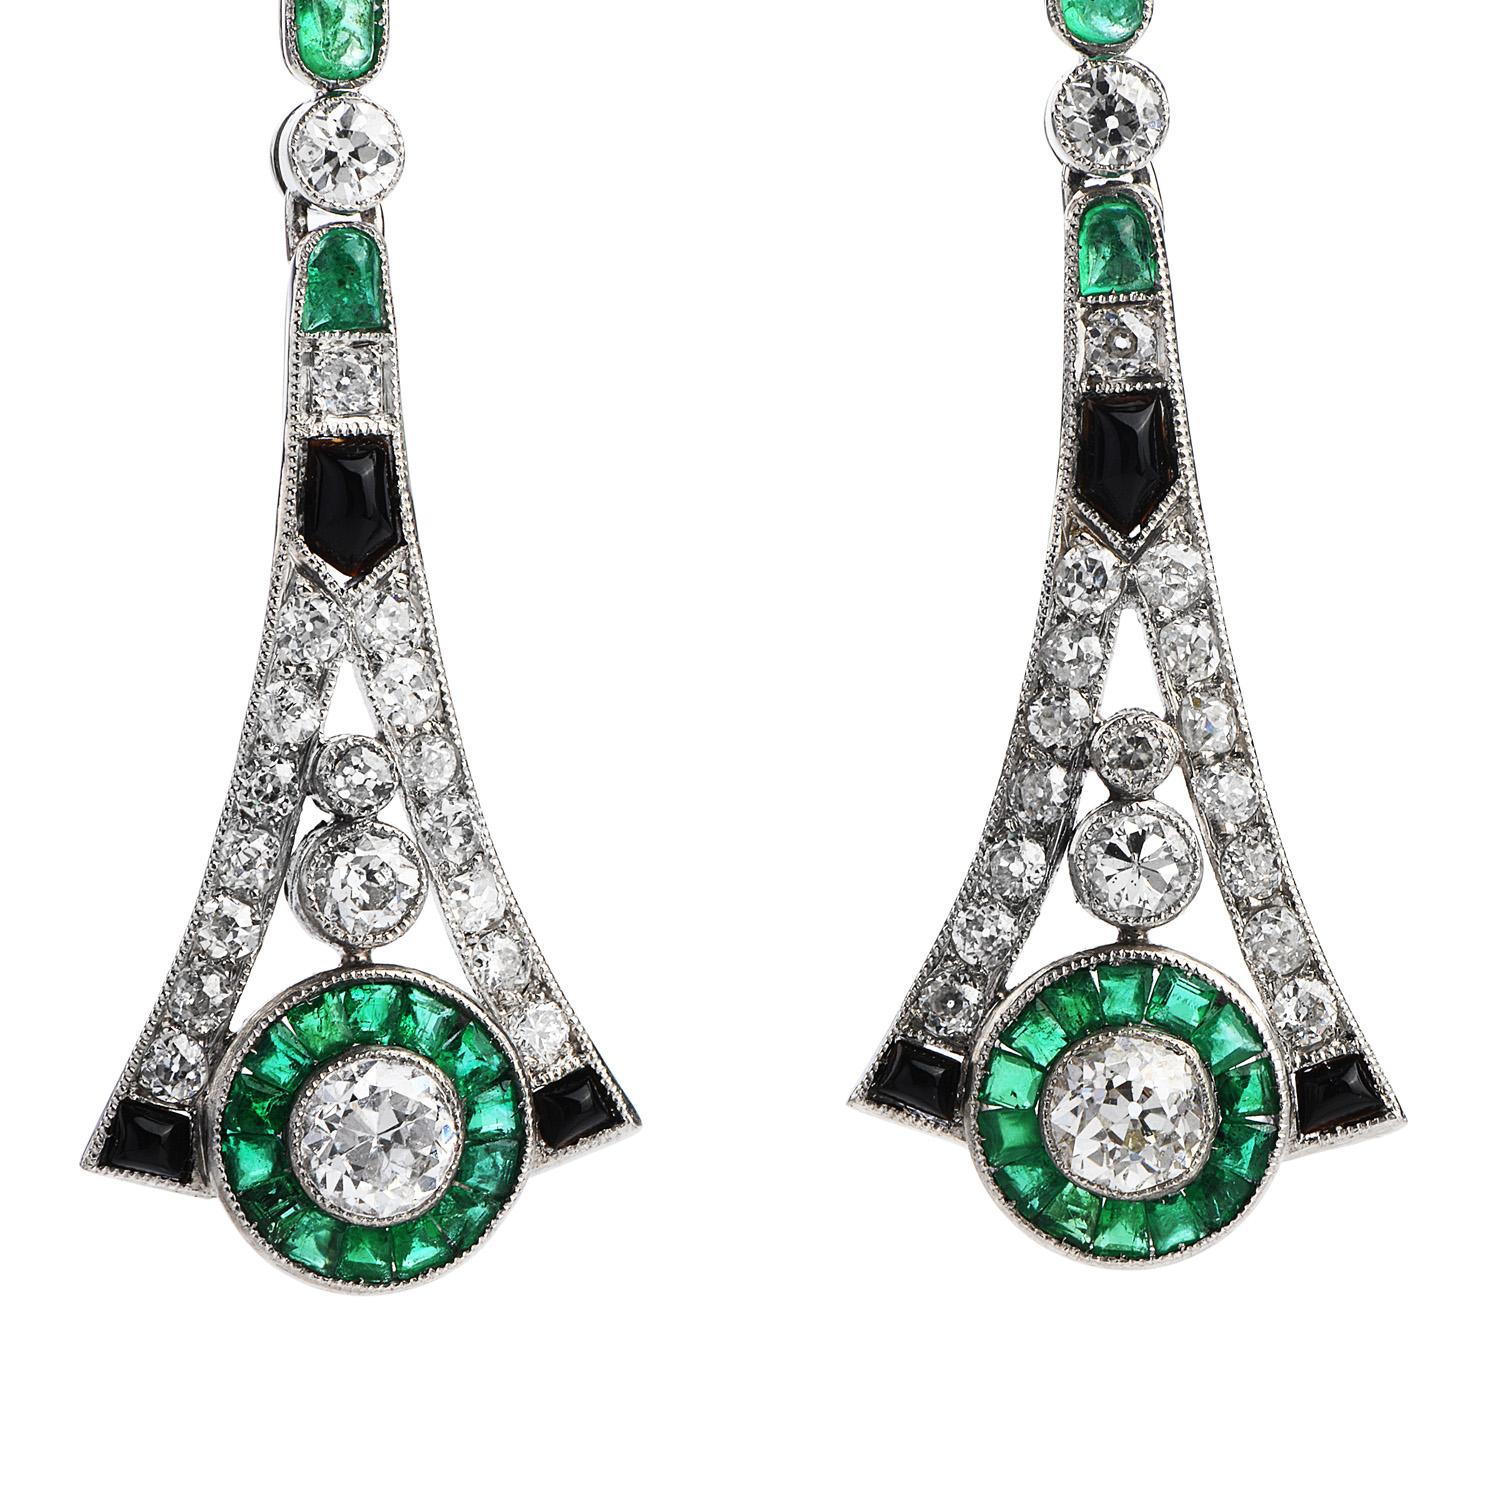 Feel spacial with these absolutely gorgeous Estate Diamond Emerald Platinum Drop Dangle Earrings.

These earrings are crafted in luxurious platinum with post backings for pierced ears. 

There are bright genuine emeralds, Cushion shape and baguette